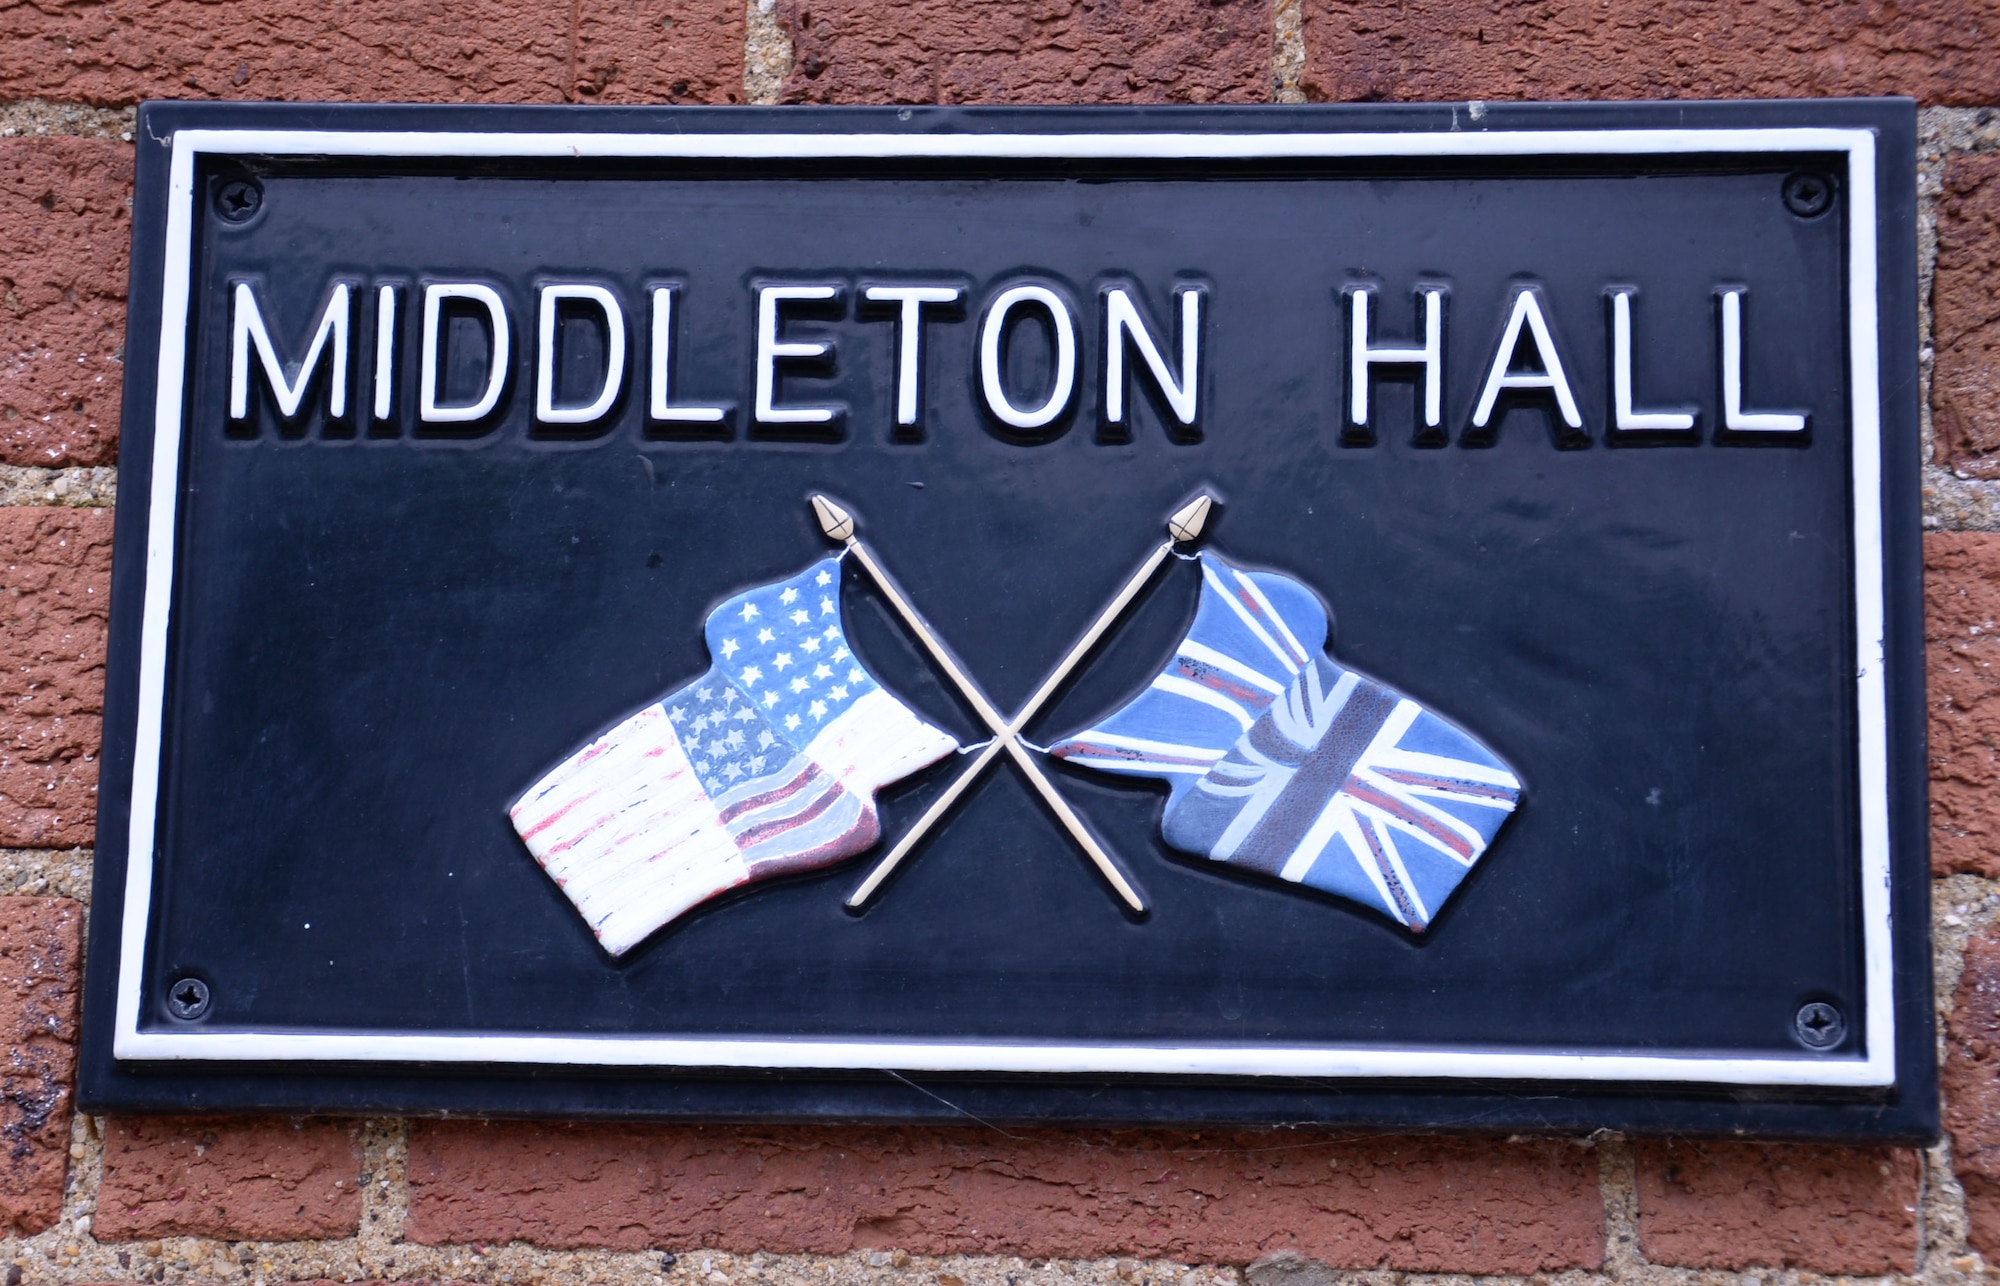 A building plaque is displayed outside Middleton Hall Aug. 4, 2016, on RAF Mildenhall, England. The building is used for many community relations events celebrating the tie between Americans and British. (U.S. Air Force photo by Gina Randall)